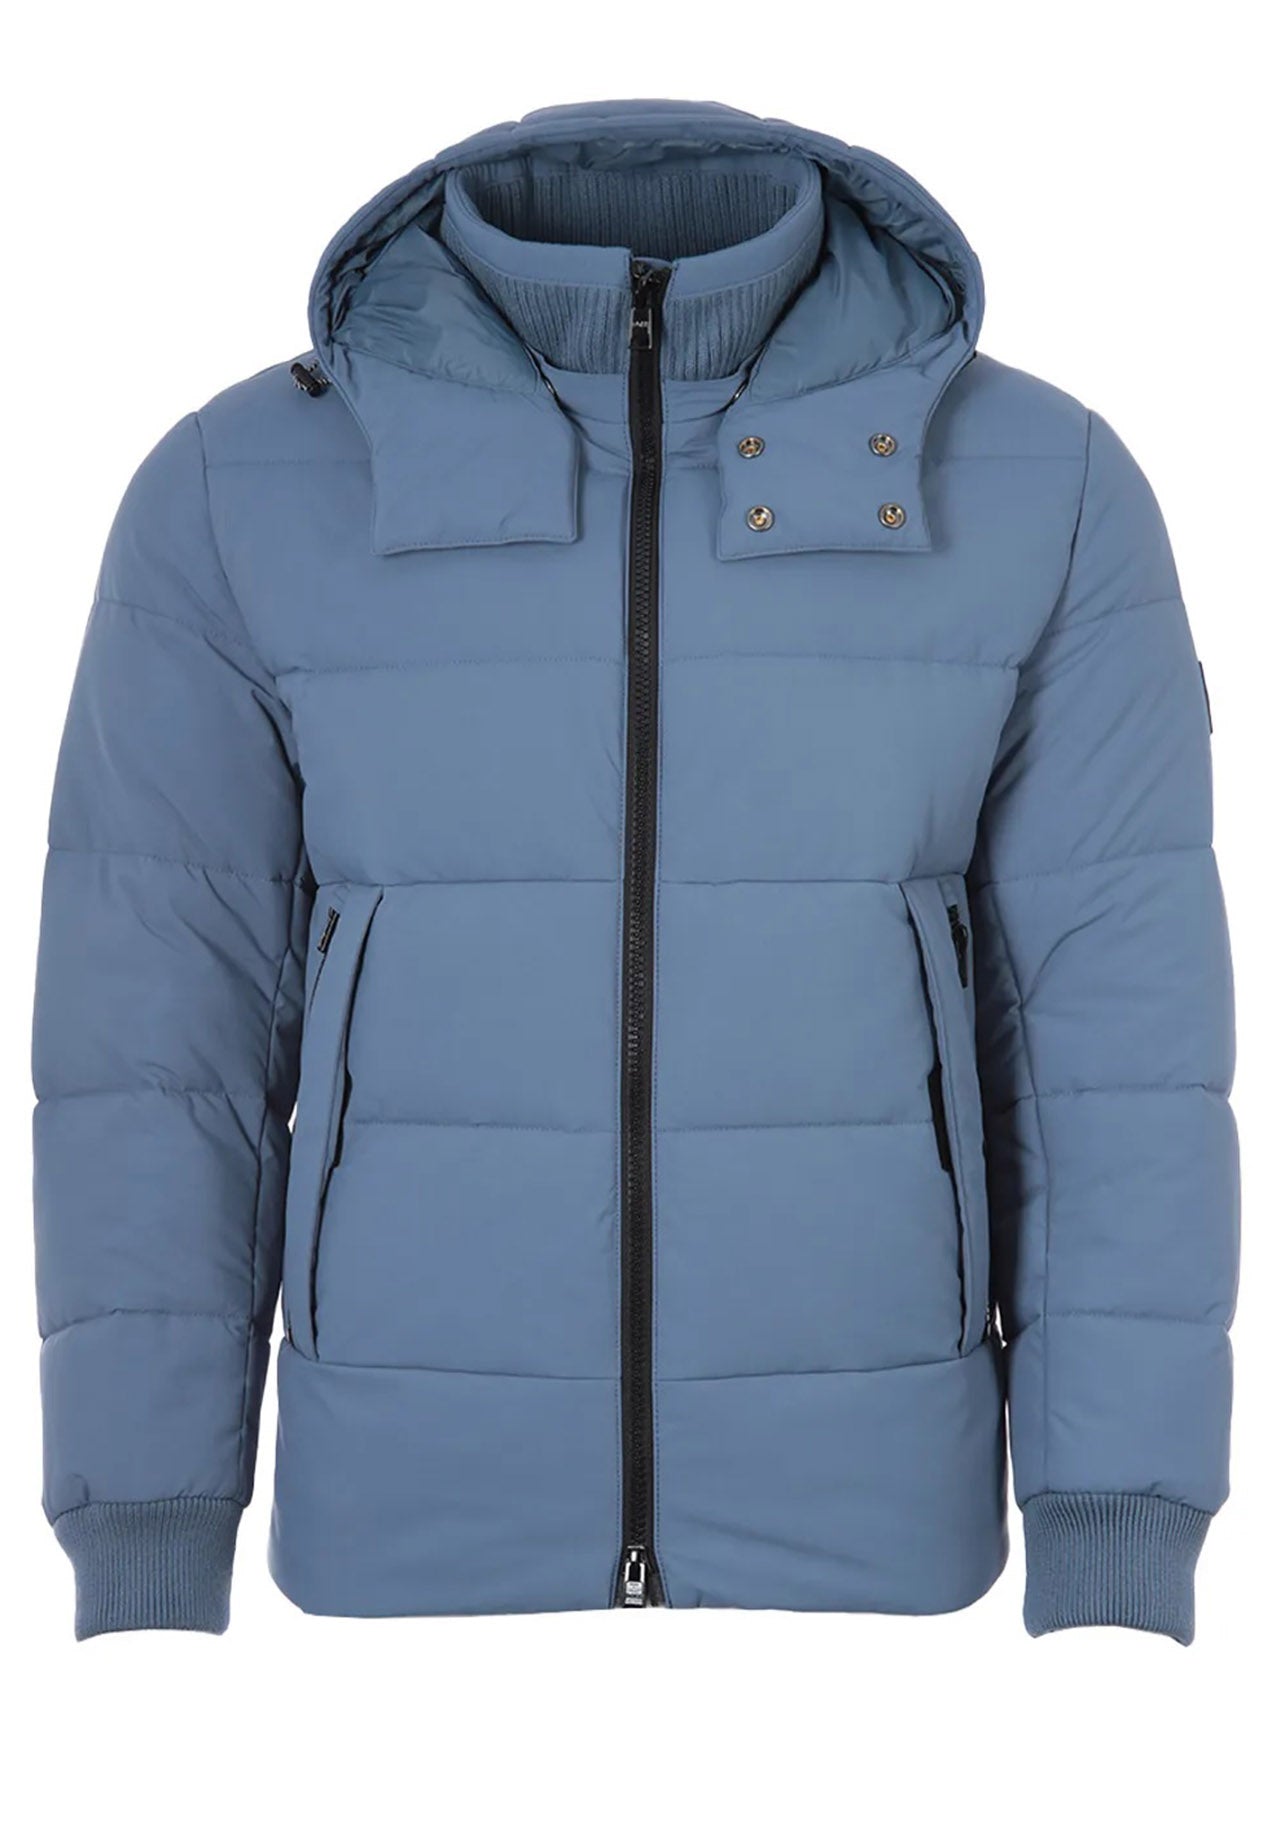 BOSS - CORLEON1 Bright Blue Water Repellent Padded Jacket With Detachable Hood 50478378 438